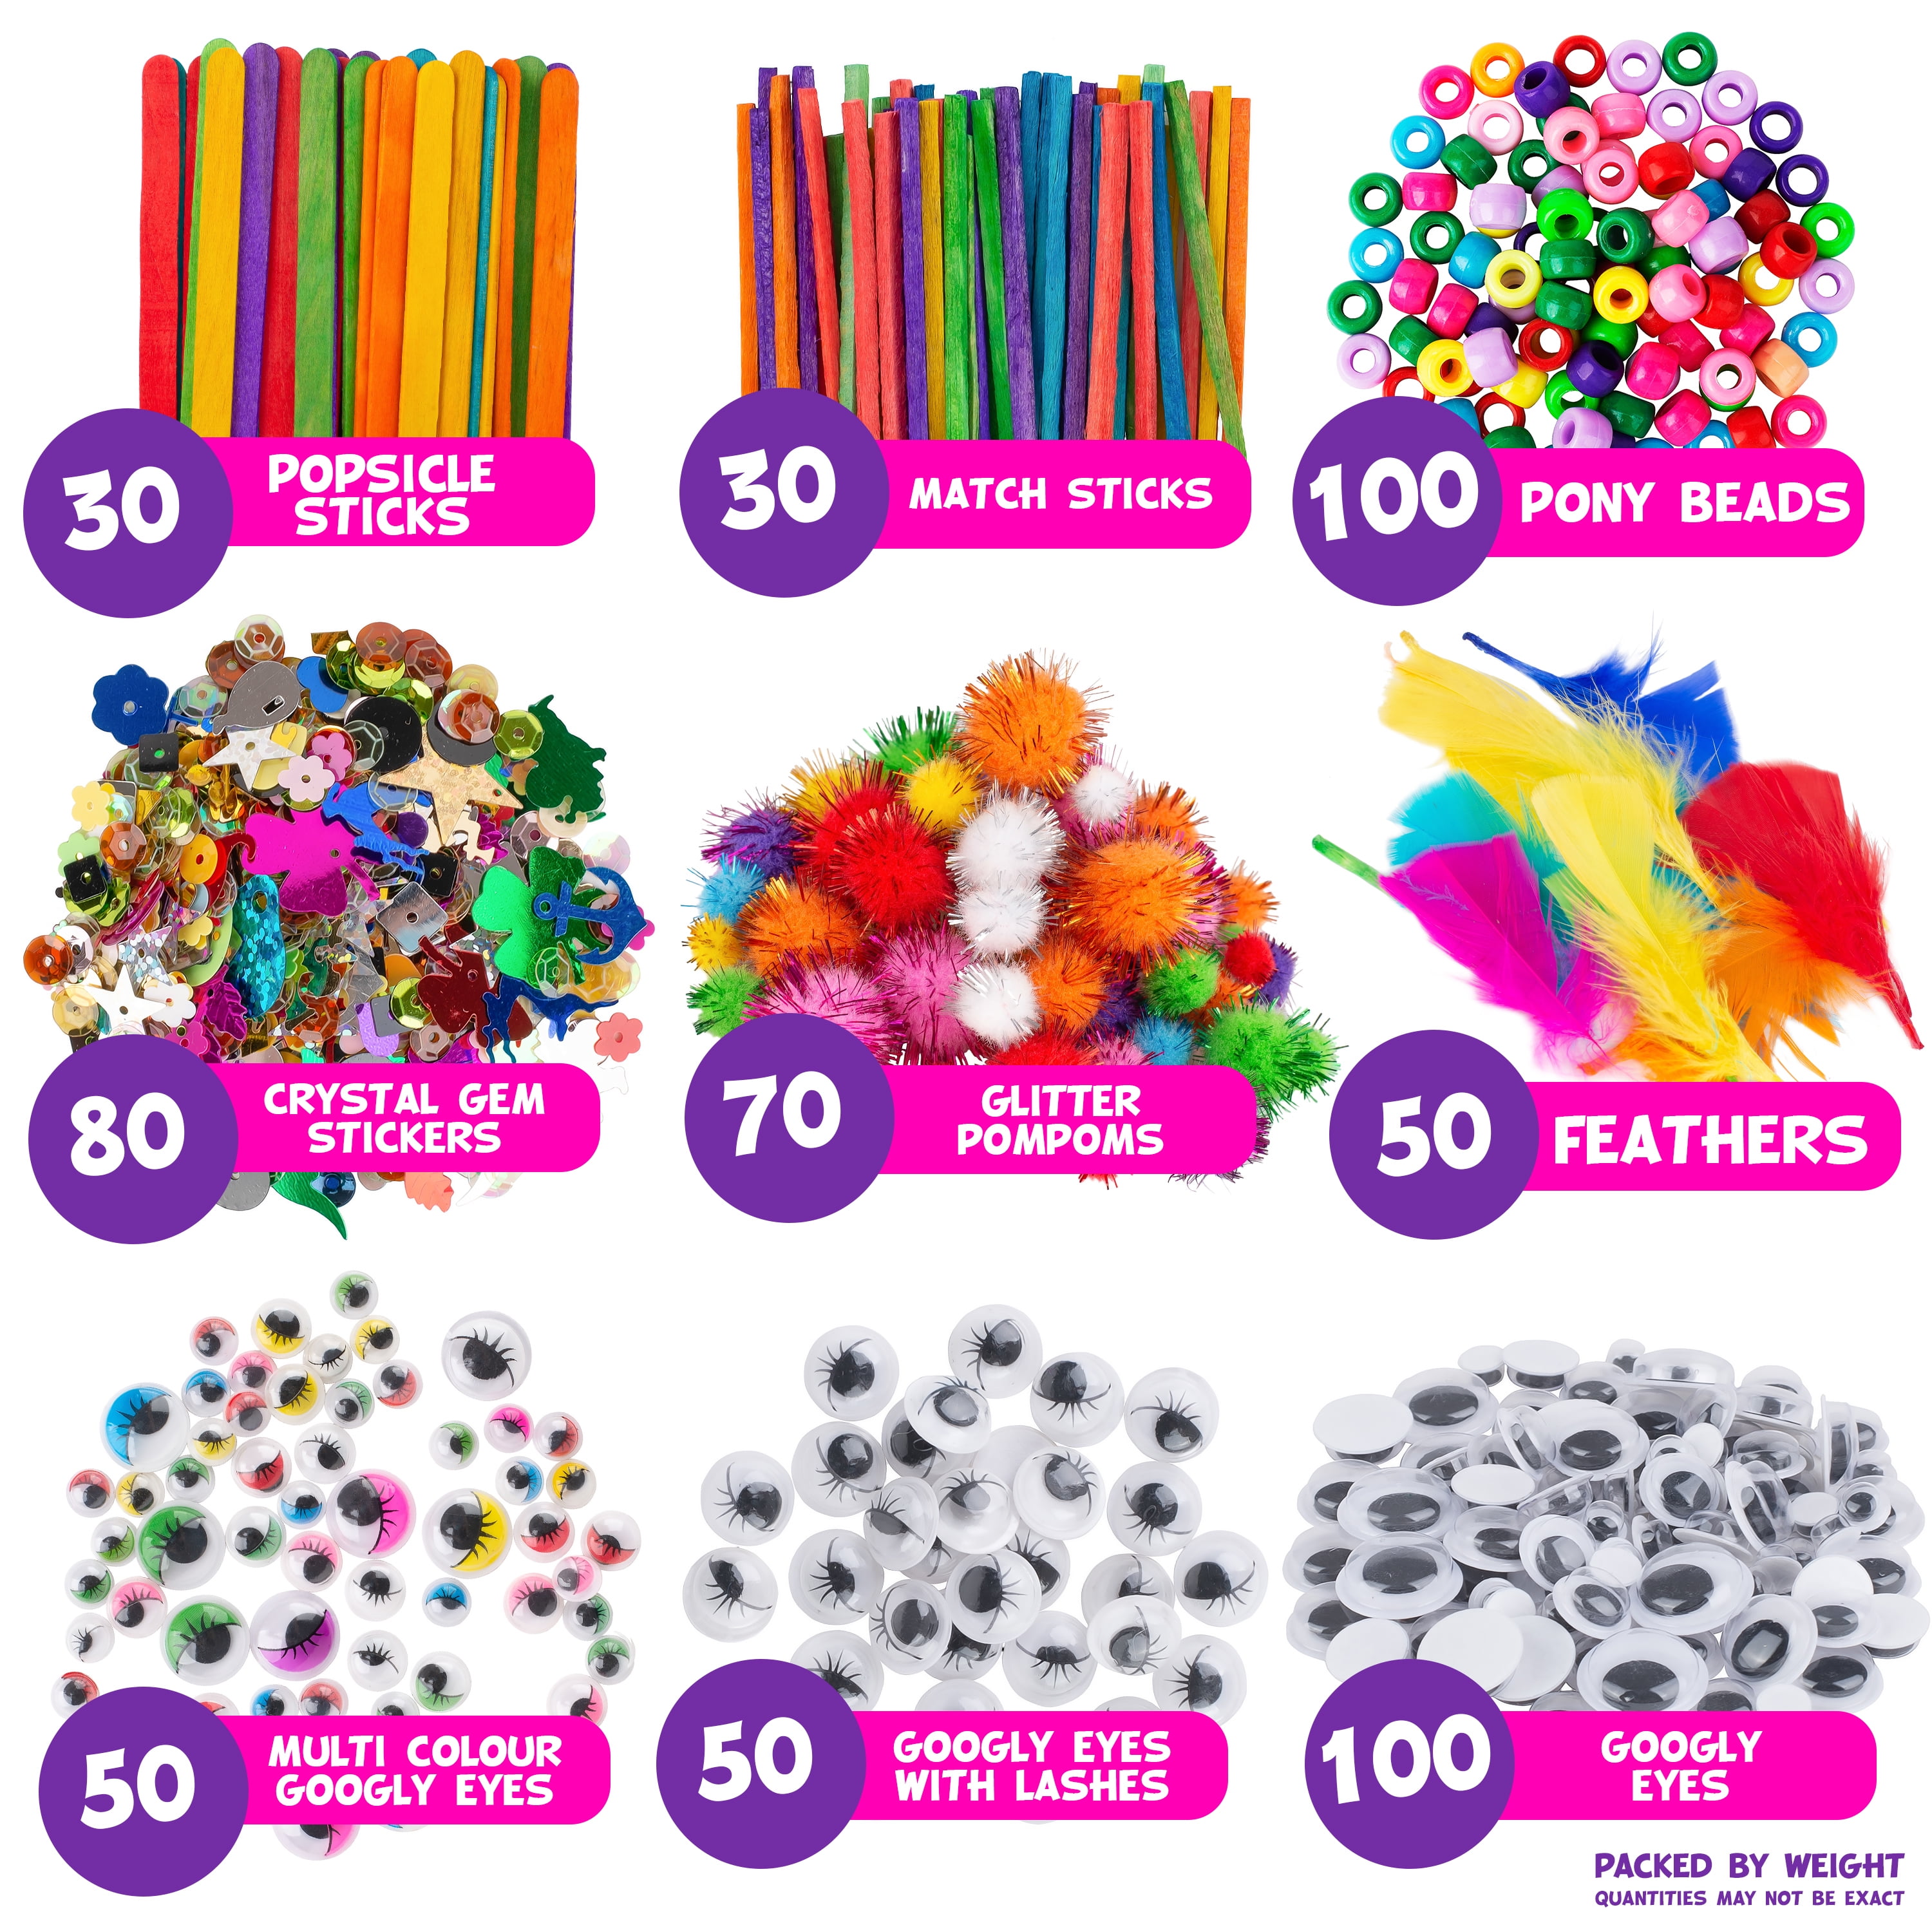  Blue Squid Arts and Craft Supplies for Kids - 3000+pcs